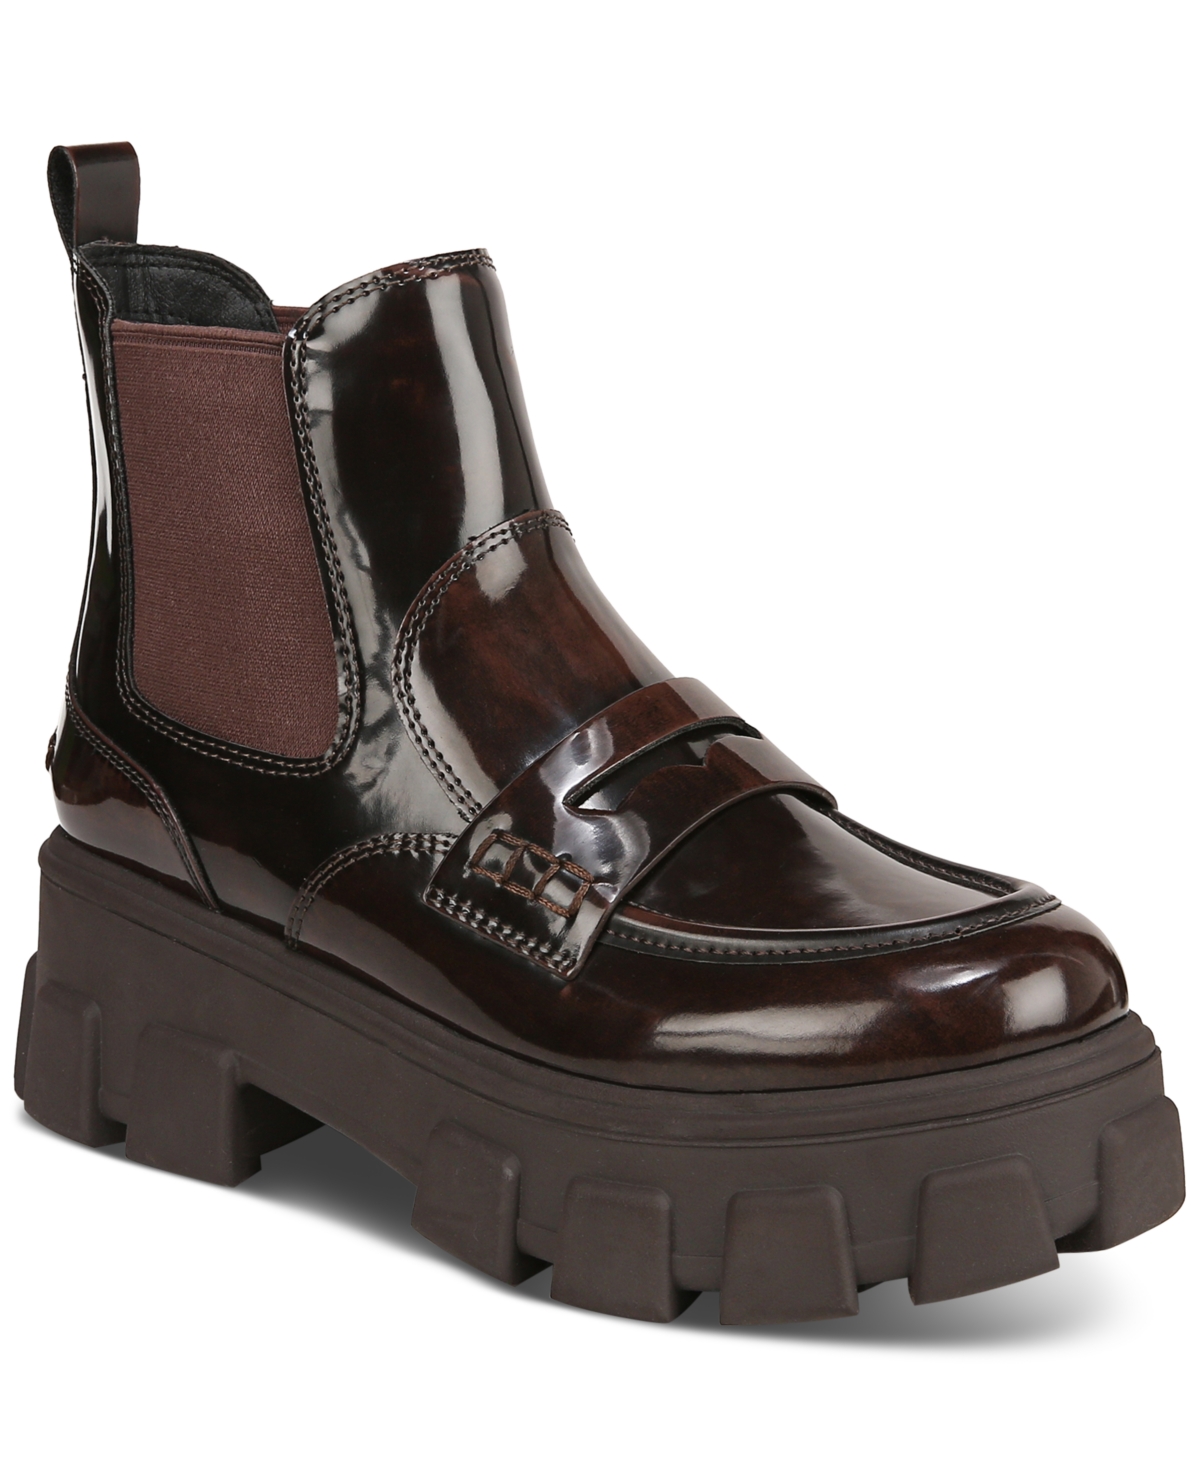 Circus Ny Women's Dia Tailored Platform Lug-sole Chelsea Booties In Chestnut